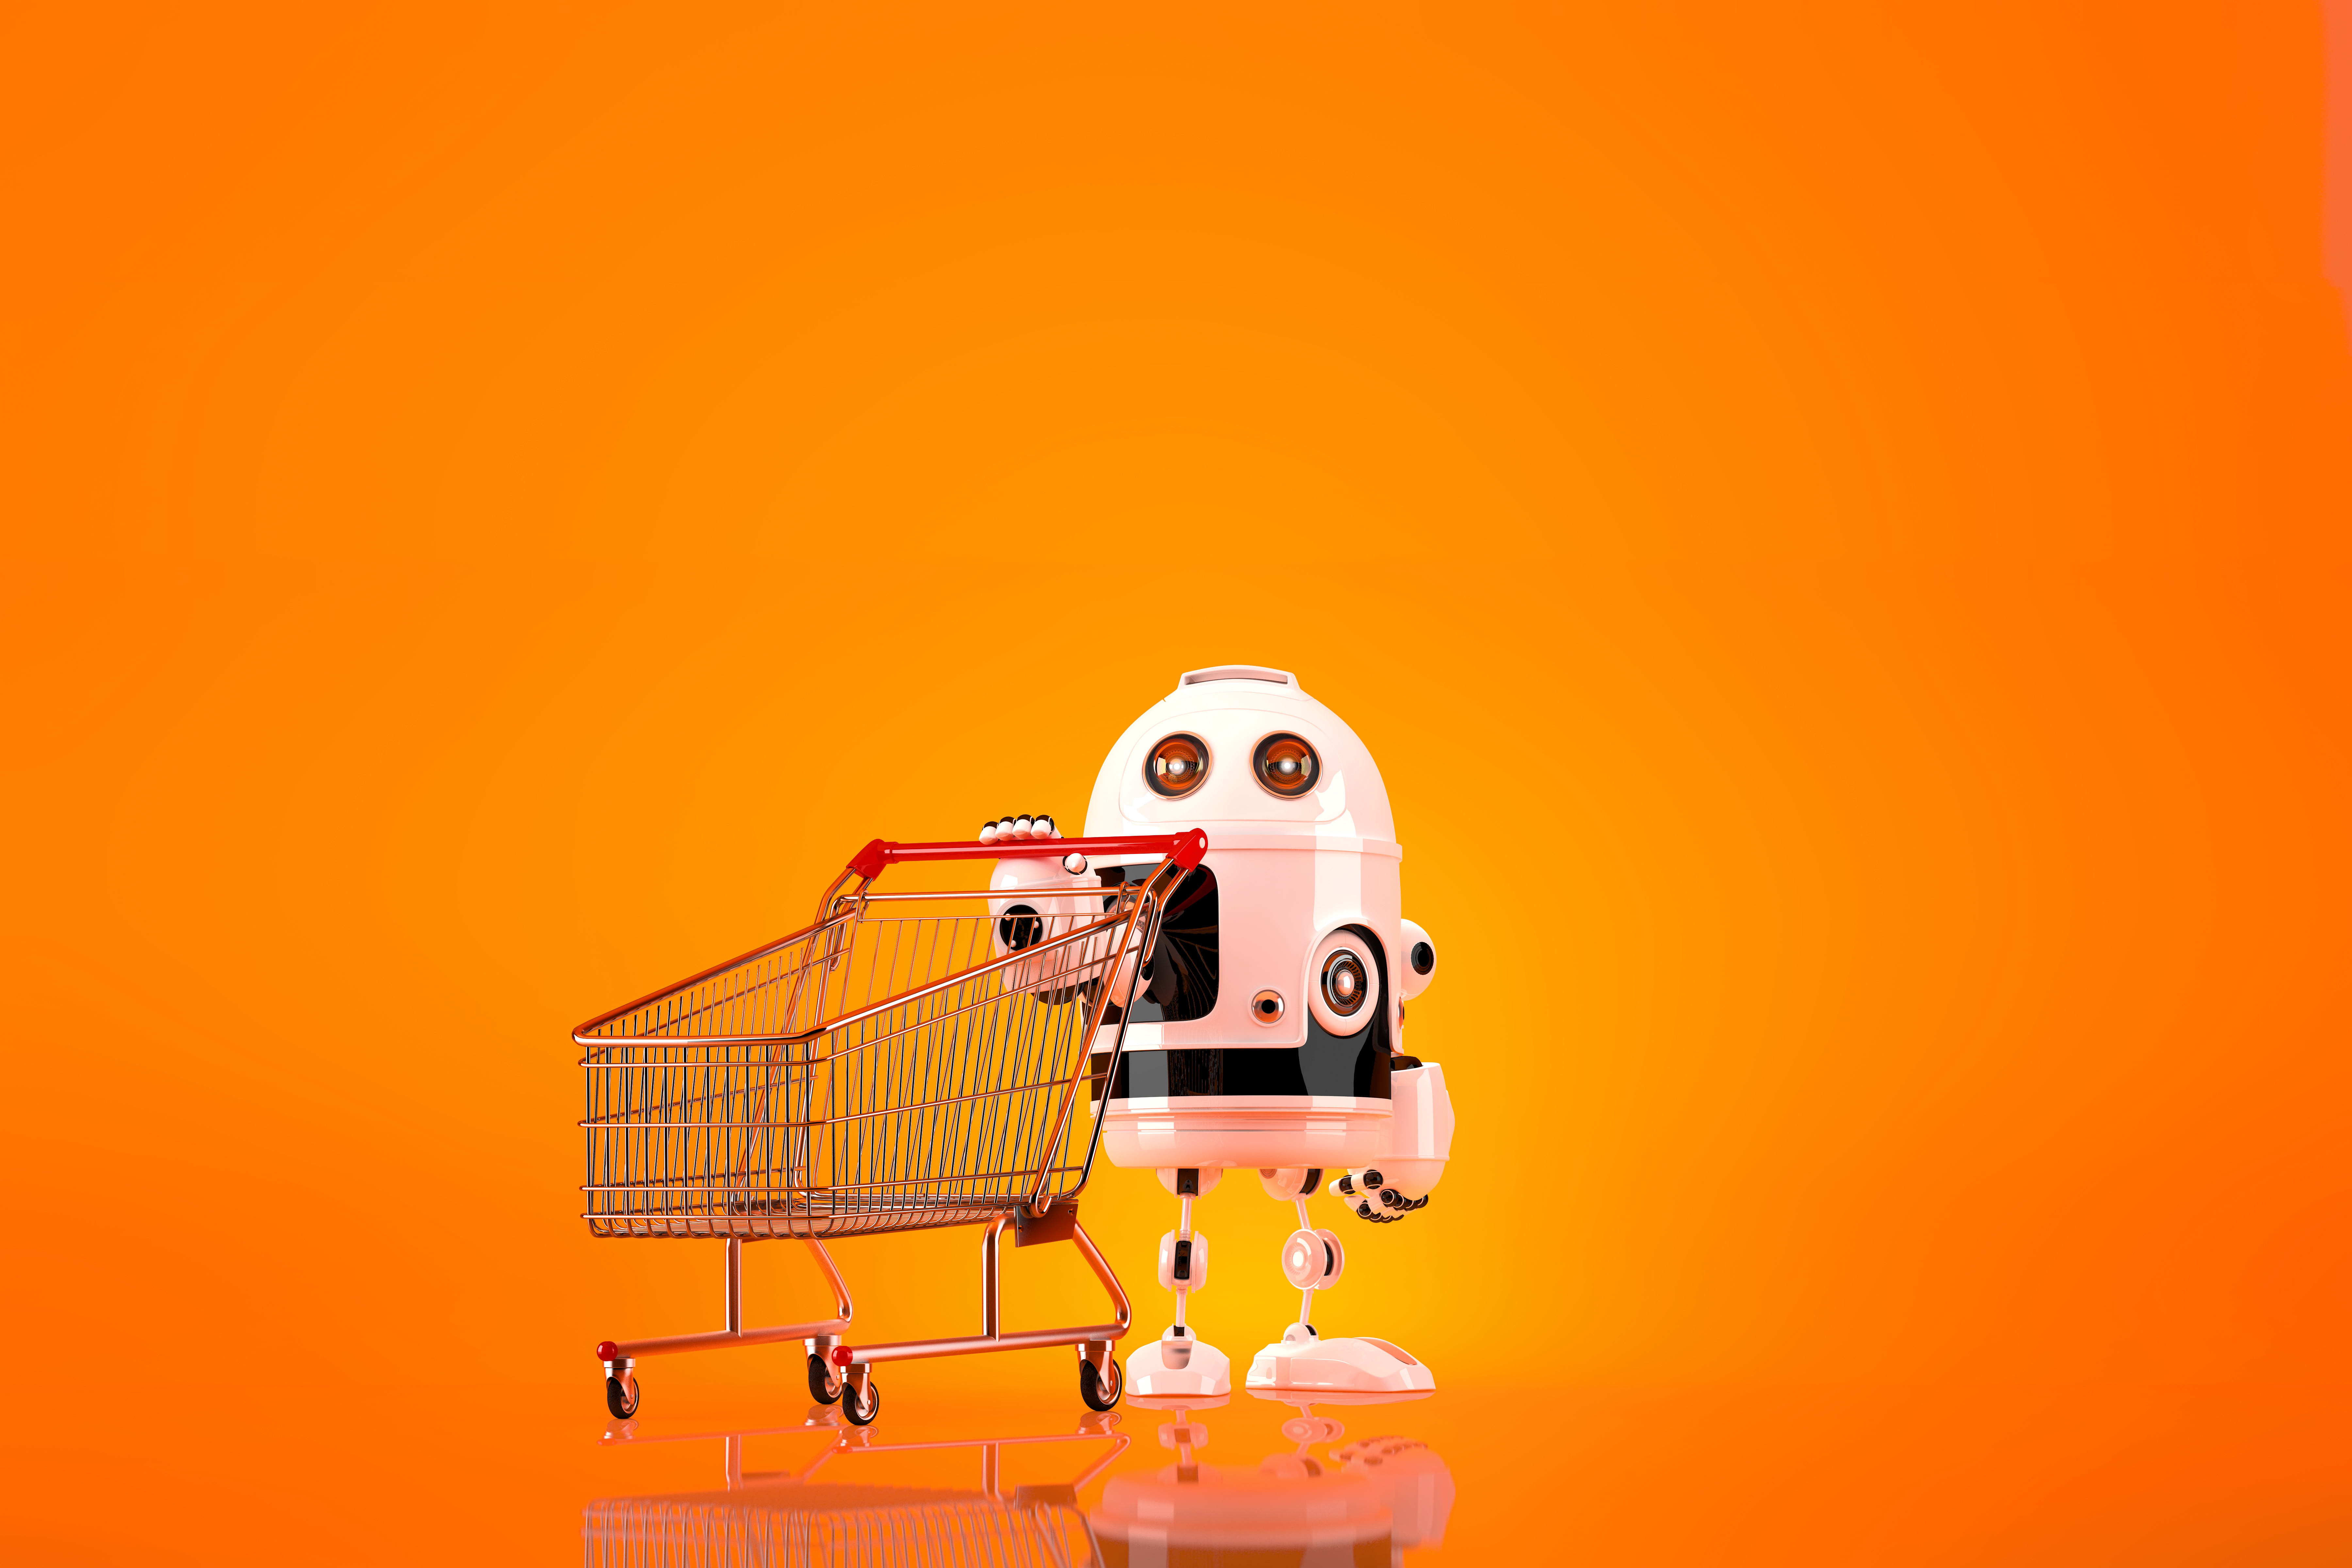 Image of a robot with a shopping cart on an orange background.